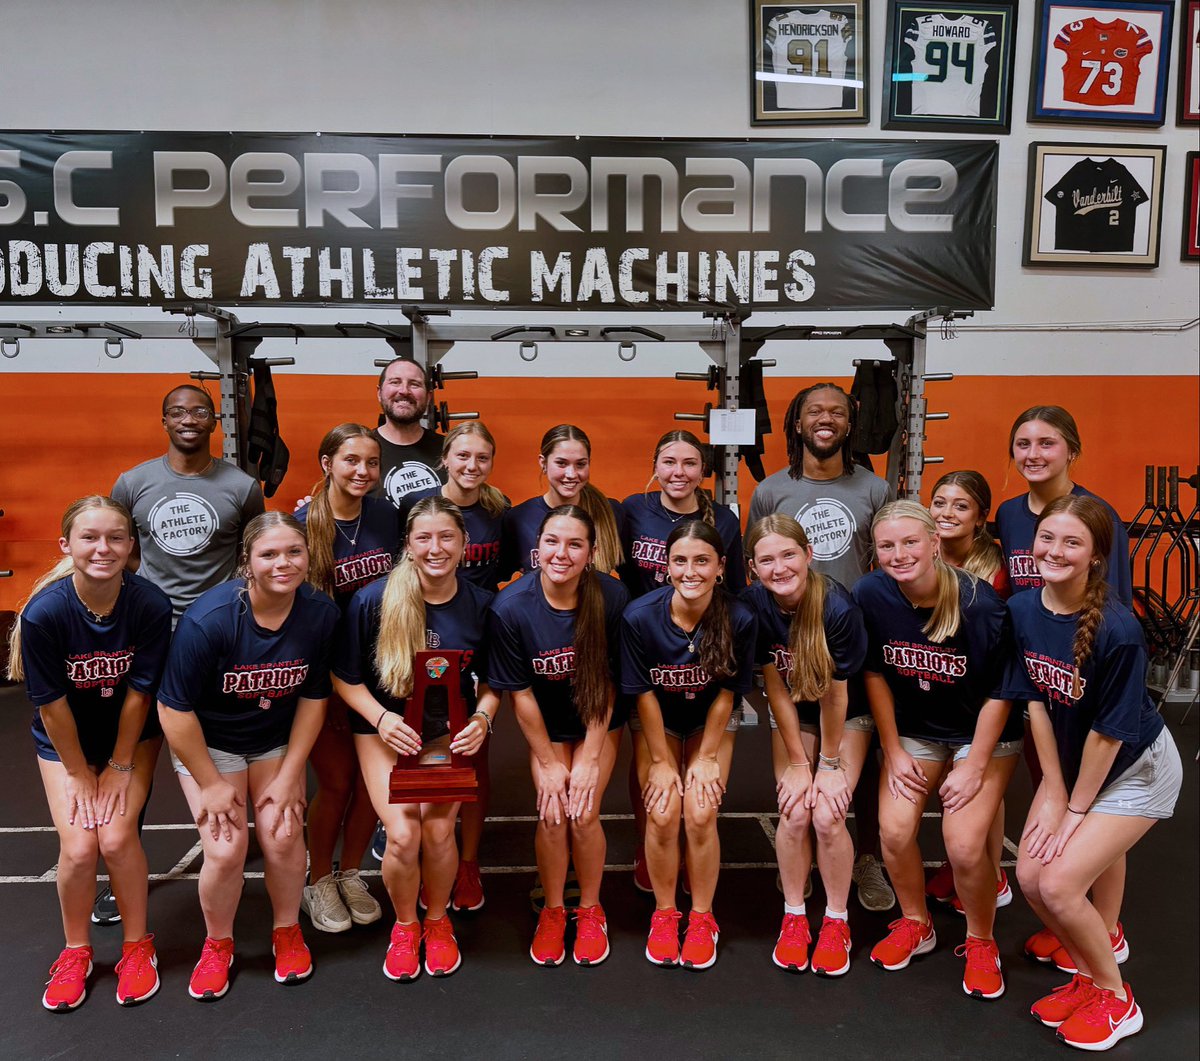 District Champions last week, back in the gym at The Athlete Factory this week! #JobNotFinished #WhateverItTakes #GoPatriots